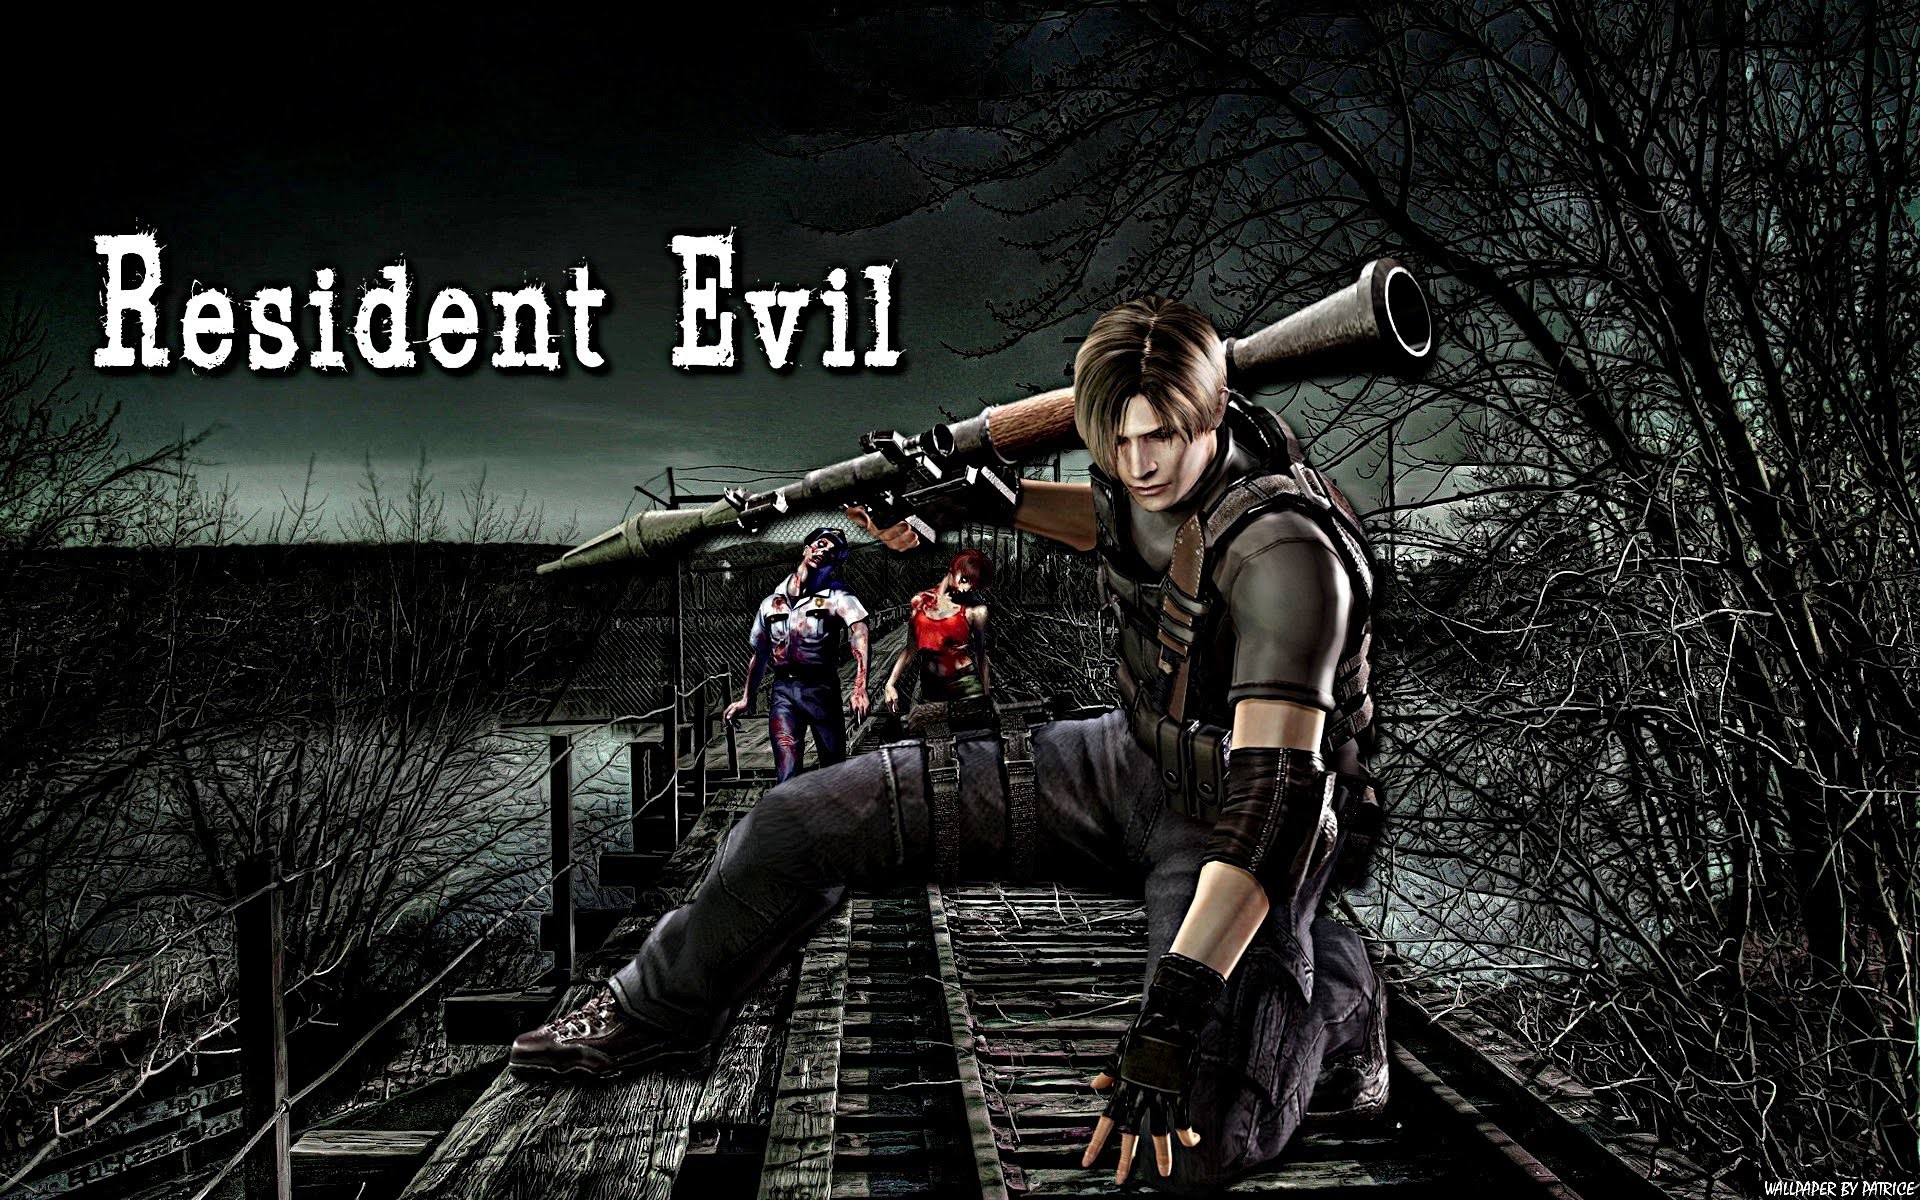 resident evil images REV D HD wallpaper and background photos 1920Ã1200